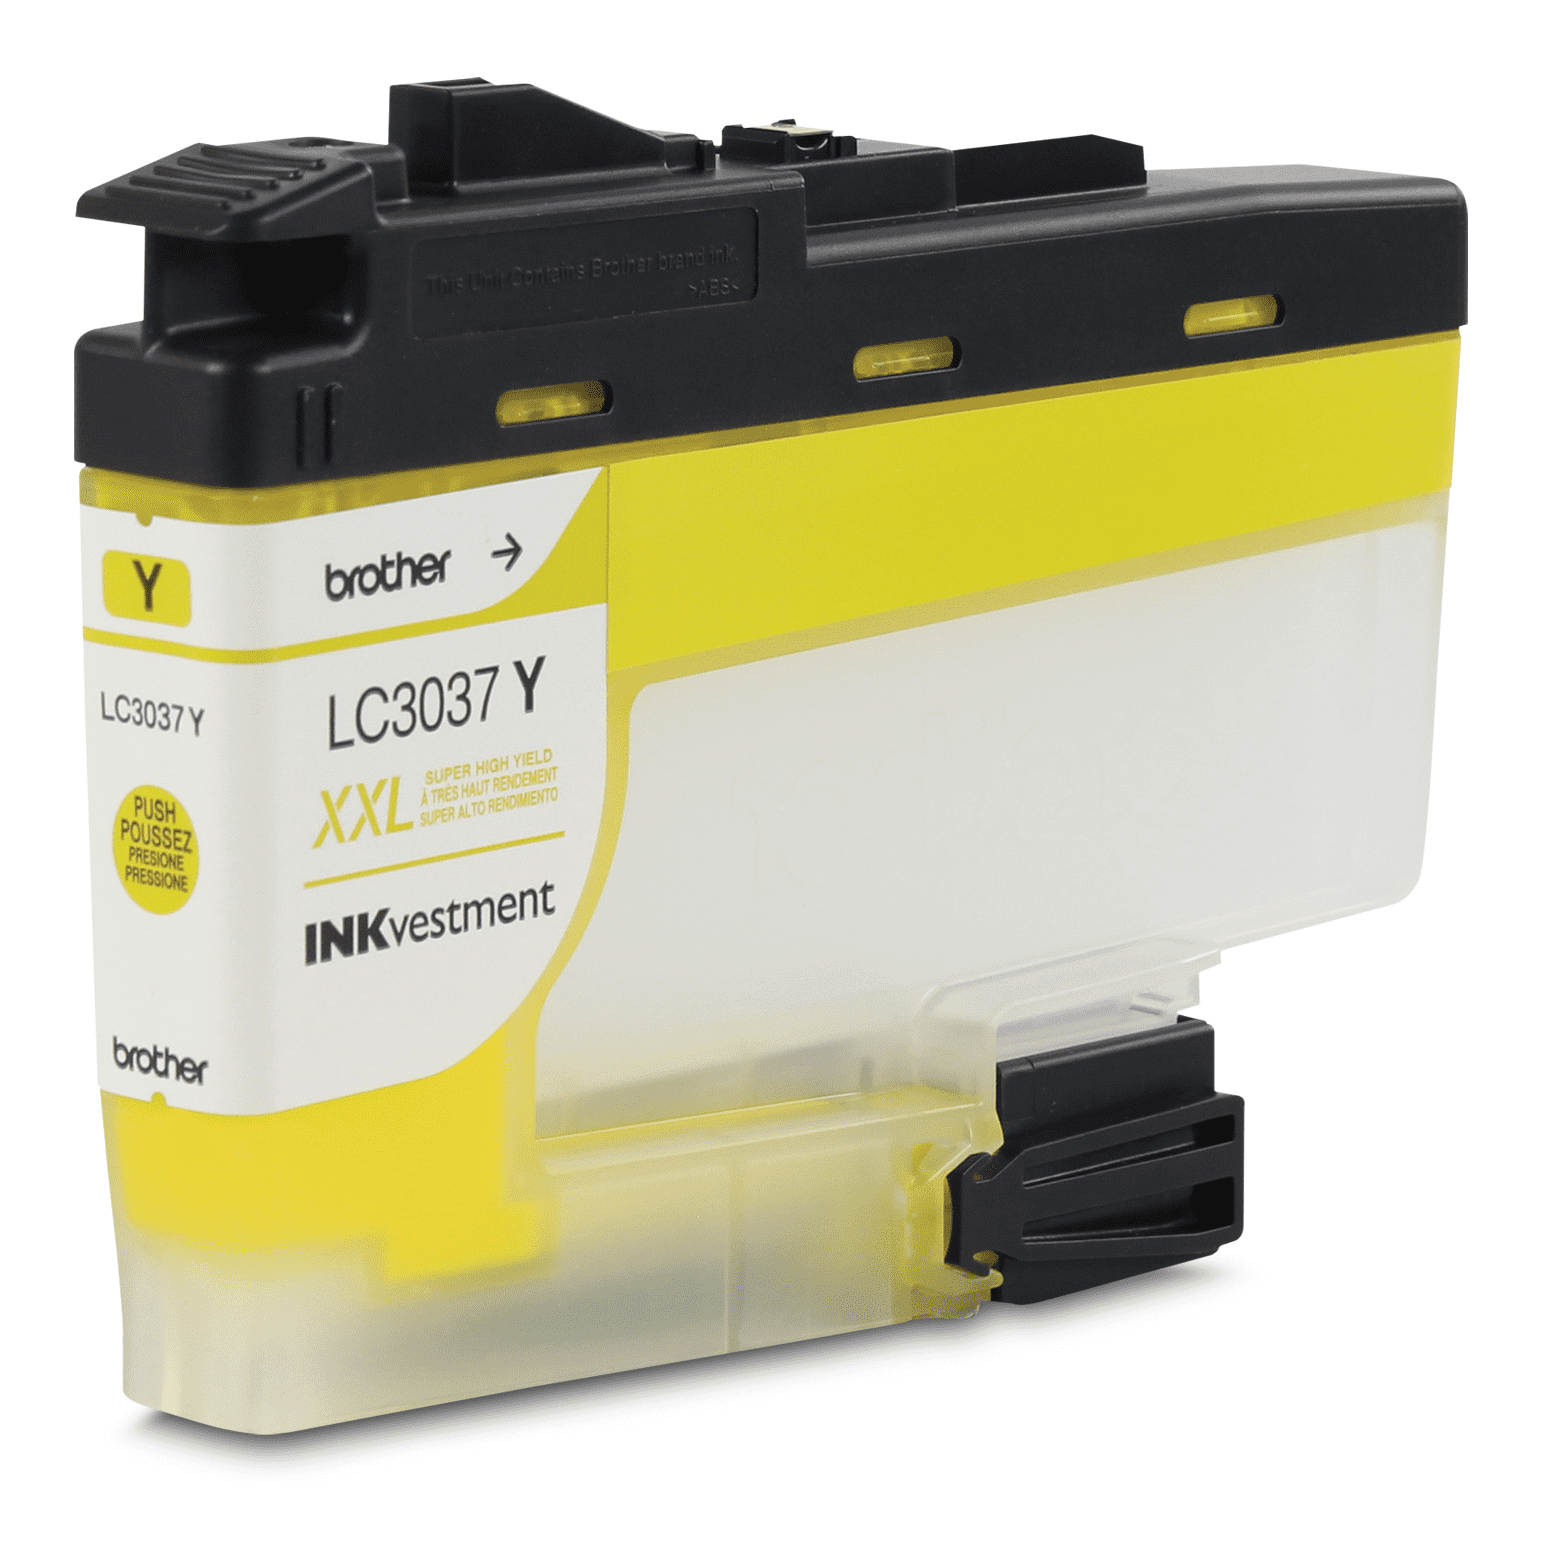 Brother LC3037YS Yellow INKvestment Tank Ink Cartridge, Super High Yield